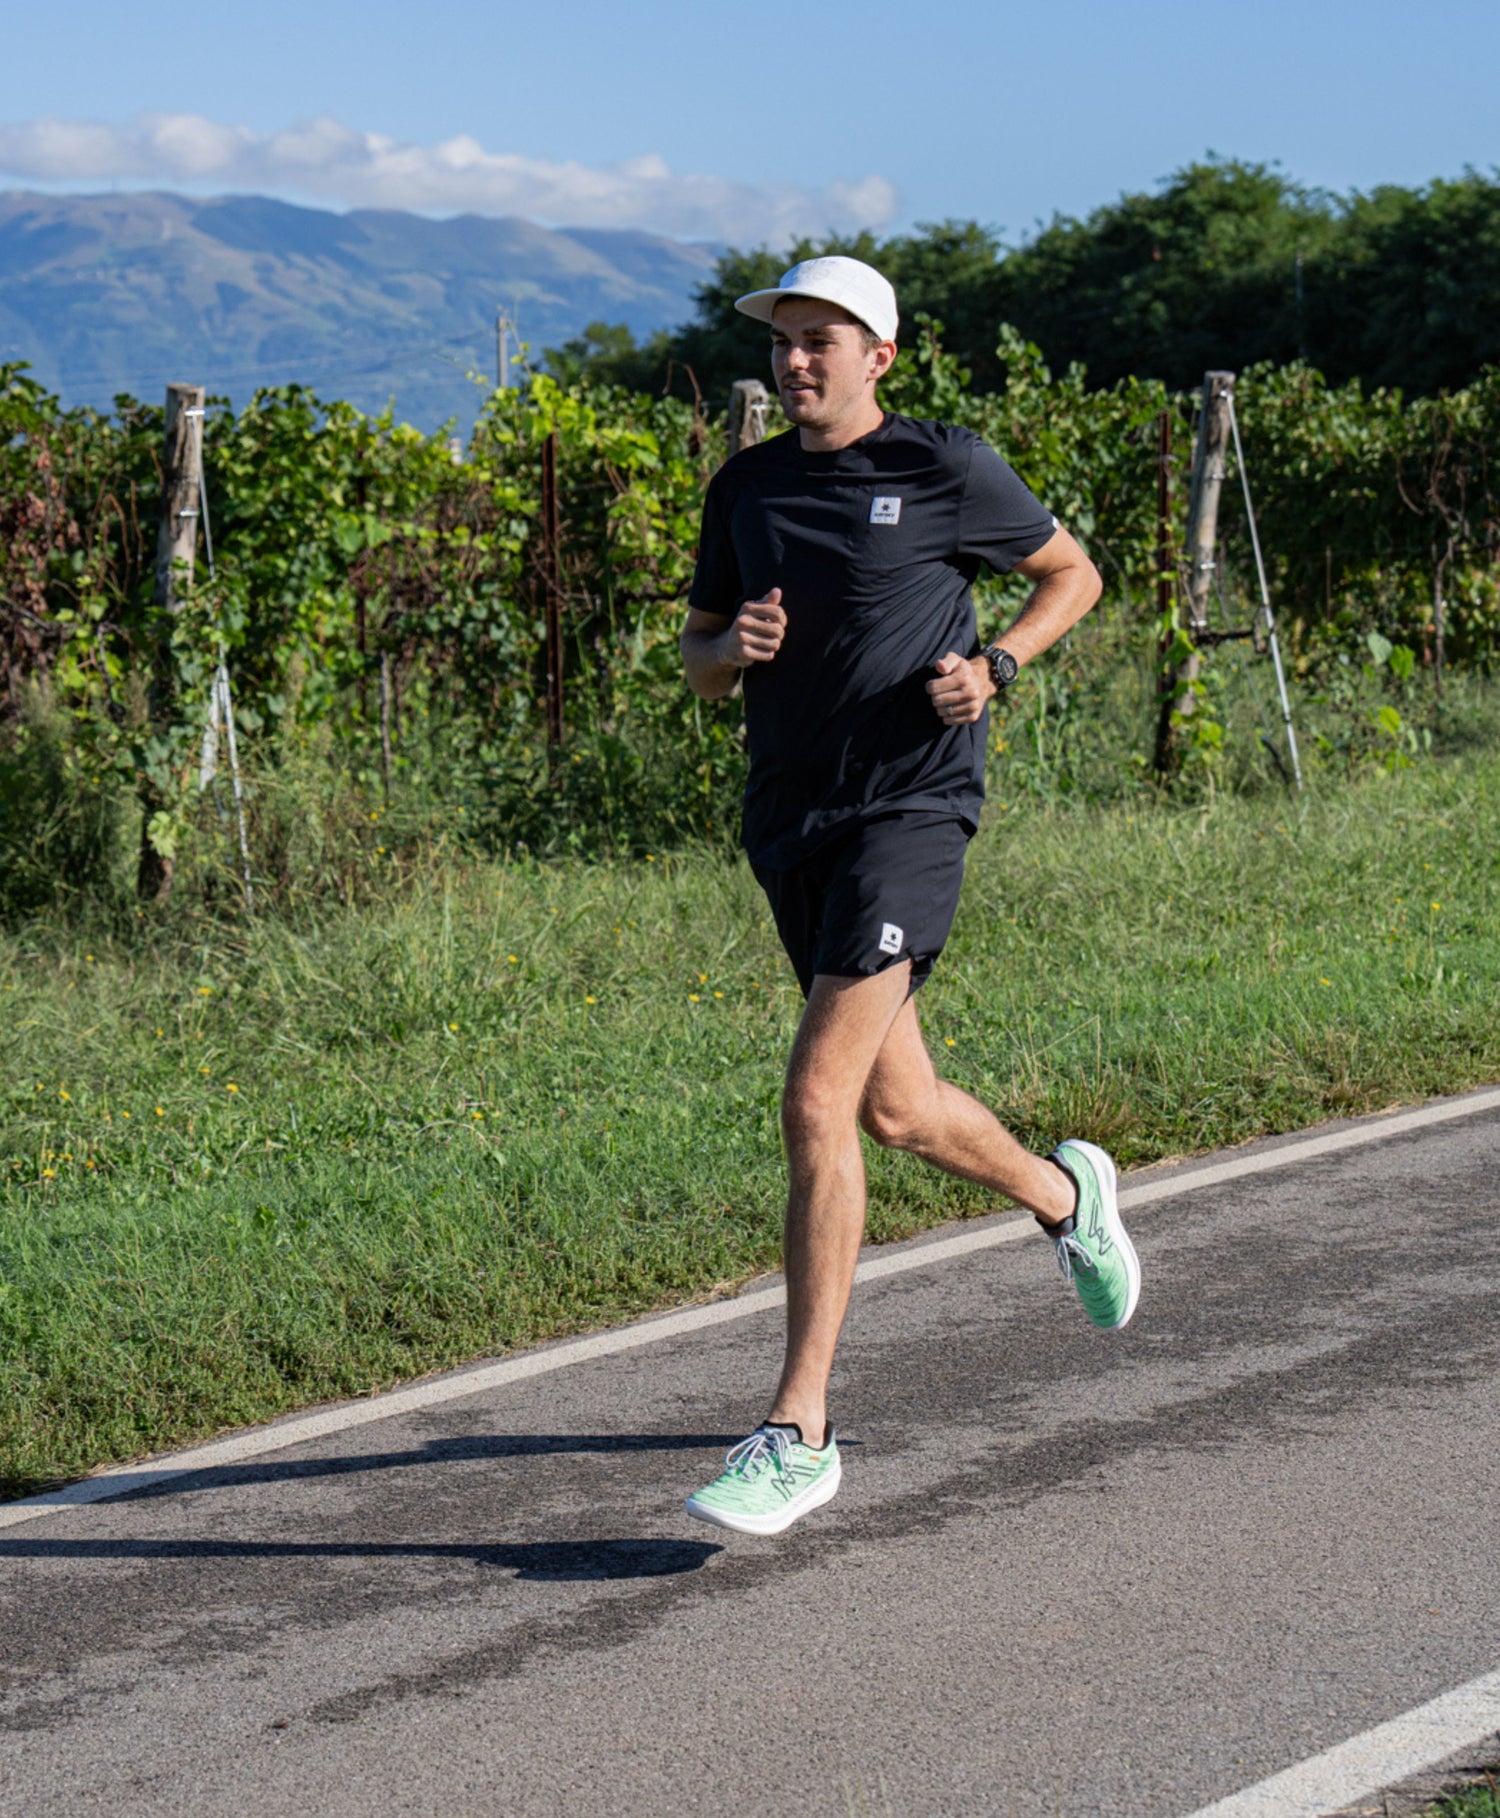 Tempo training along the vineyards with the men's KARHU Fusion 4.0